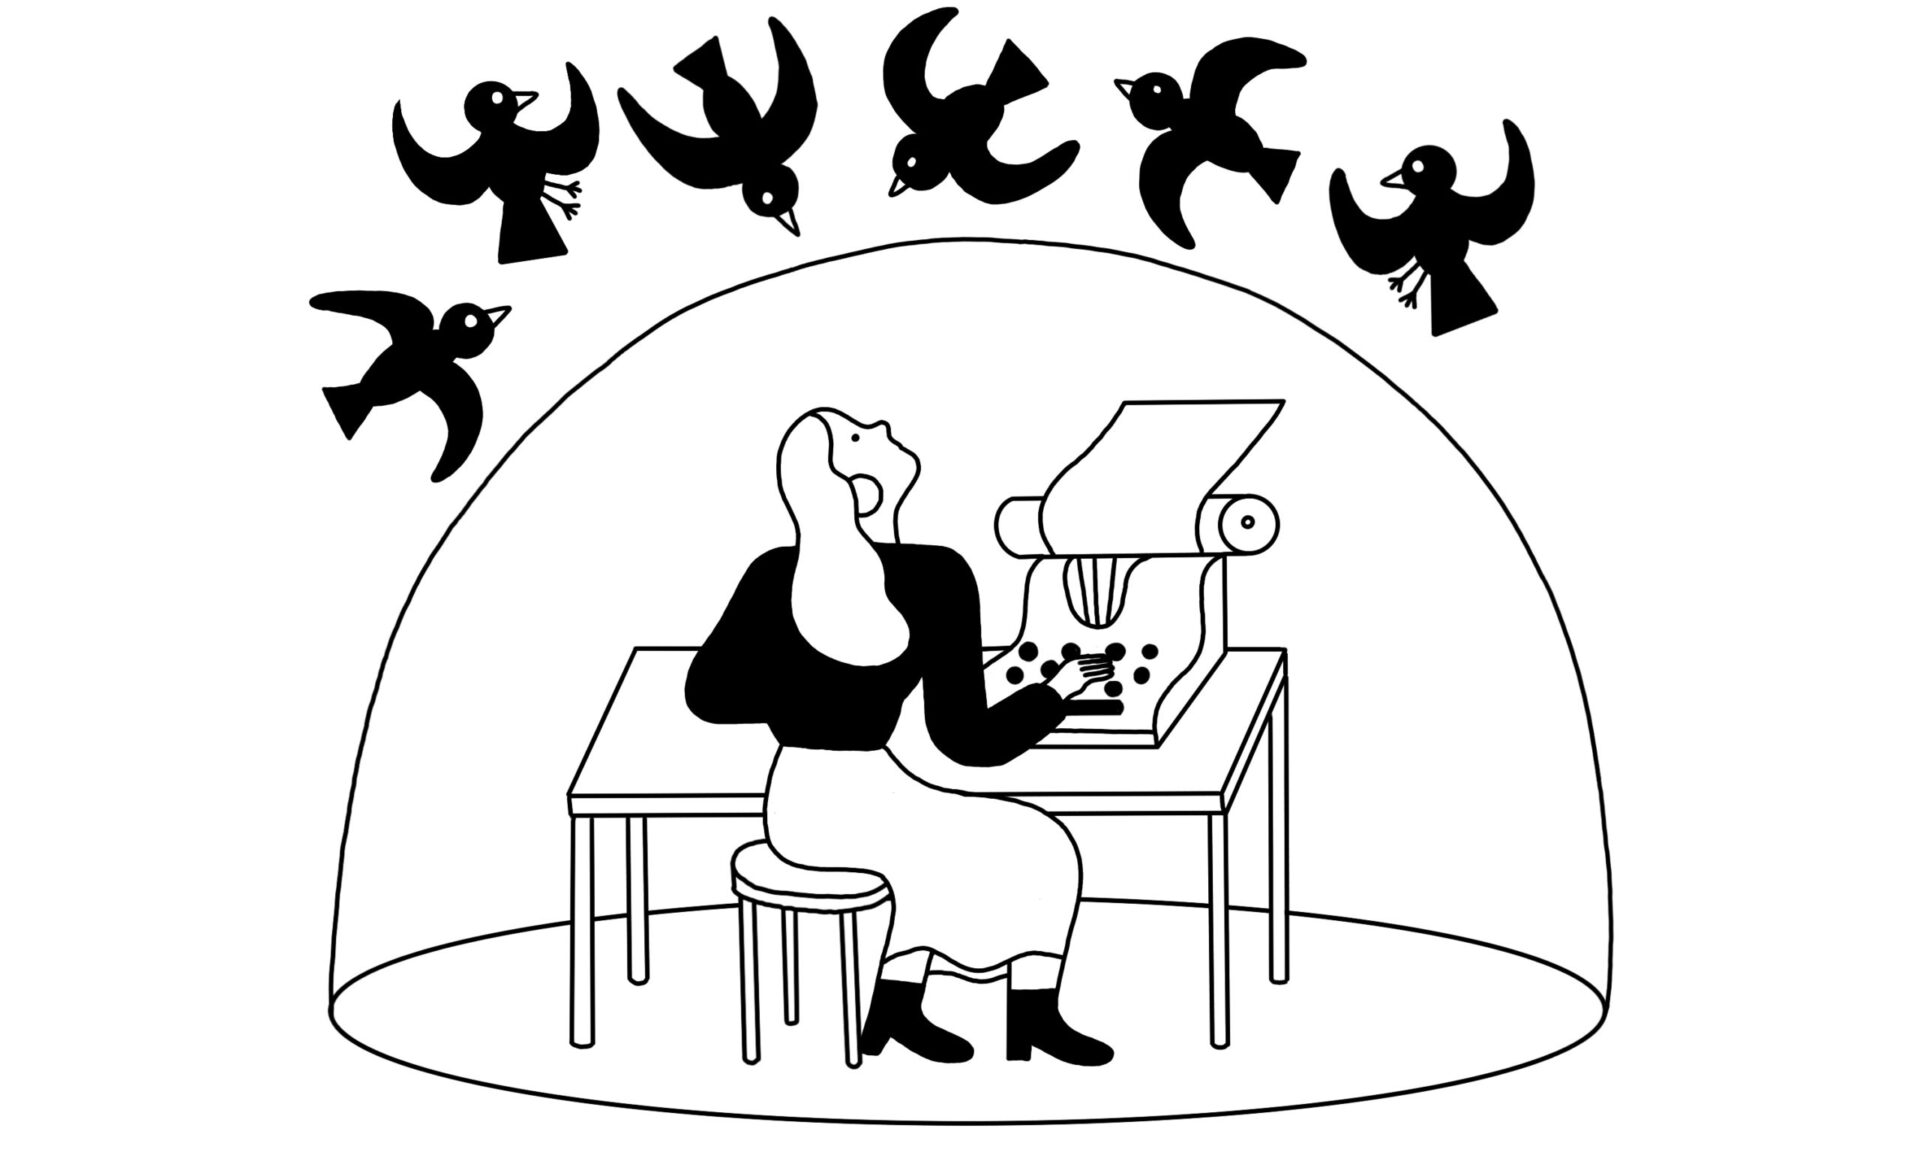 A woman sits at a typewriter inside a bubble, blocked from the outside world, and gazes up at the black birds flying directly outside of it.